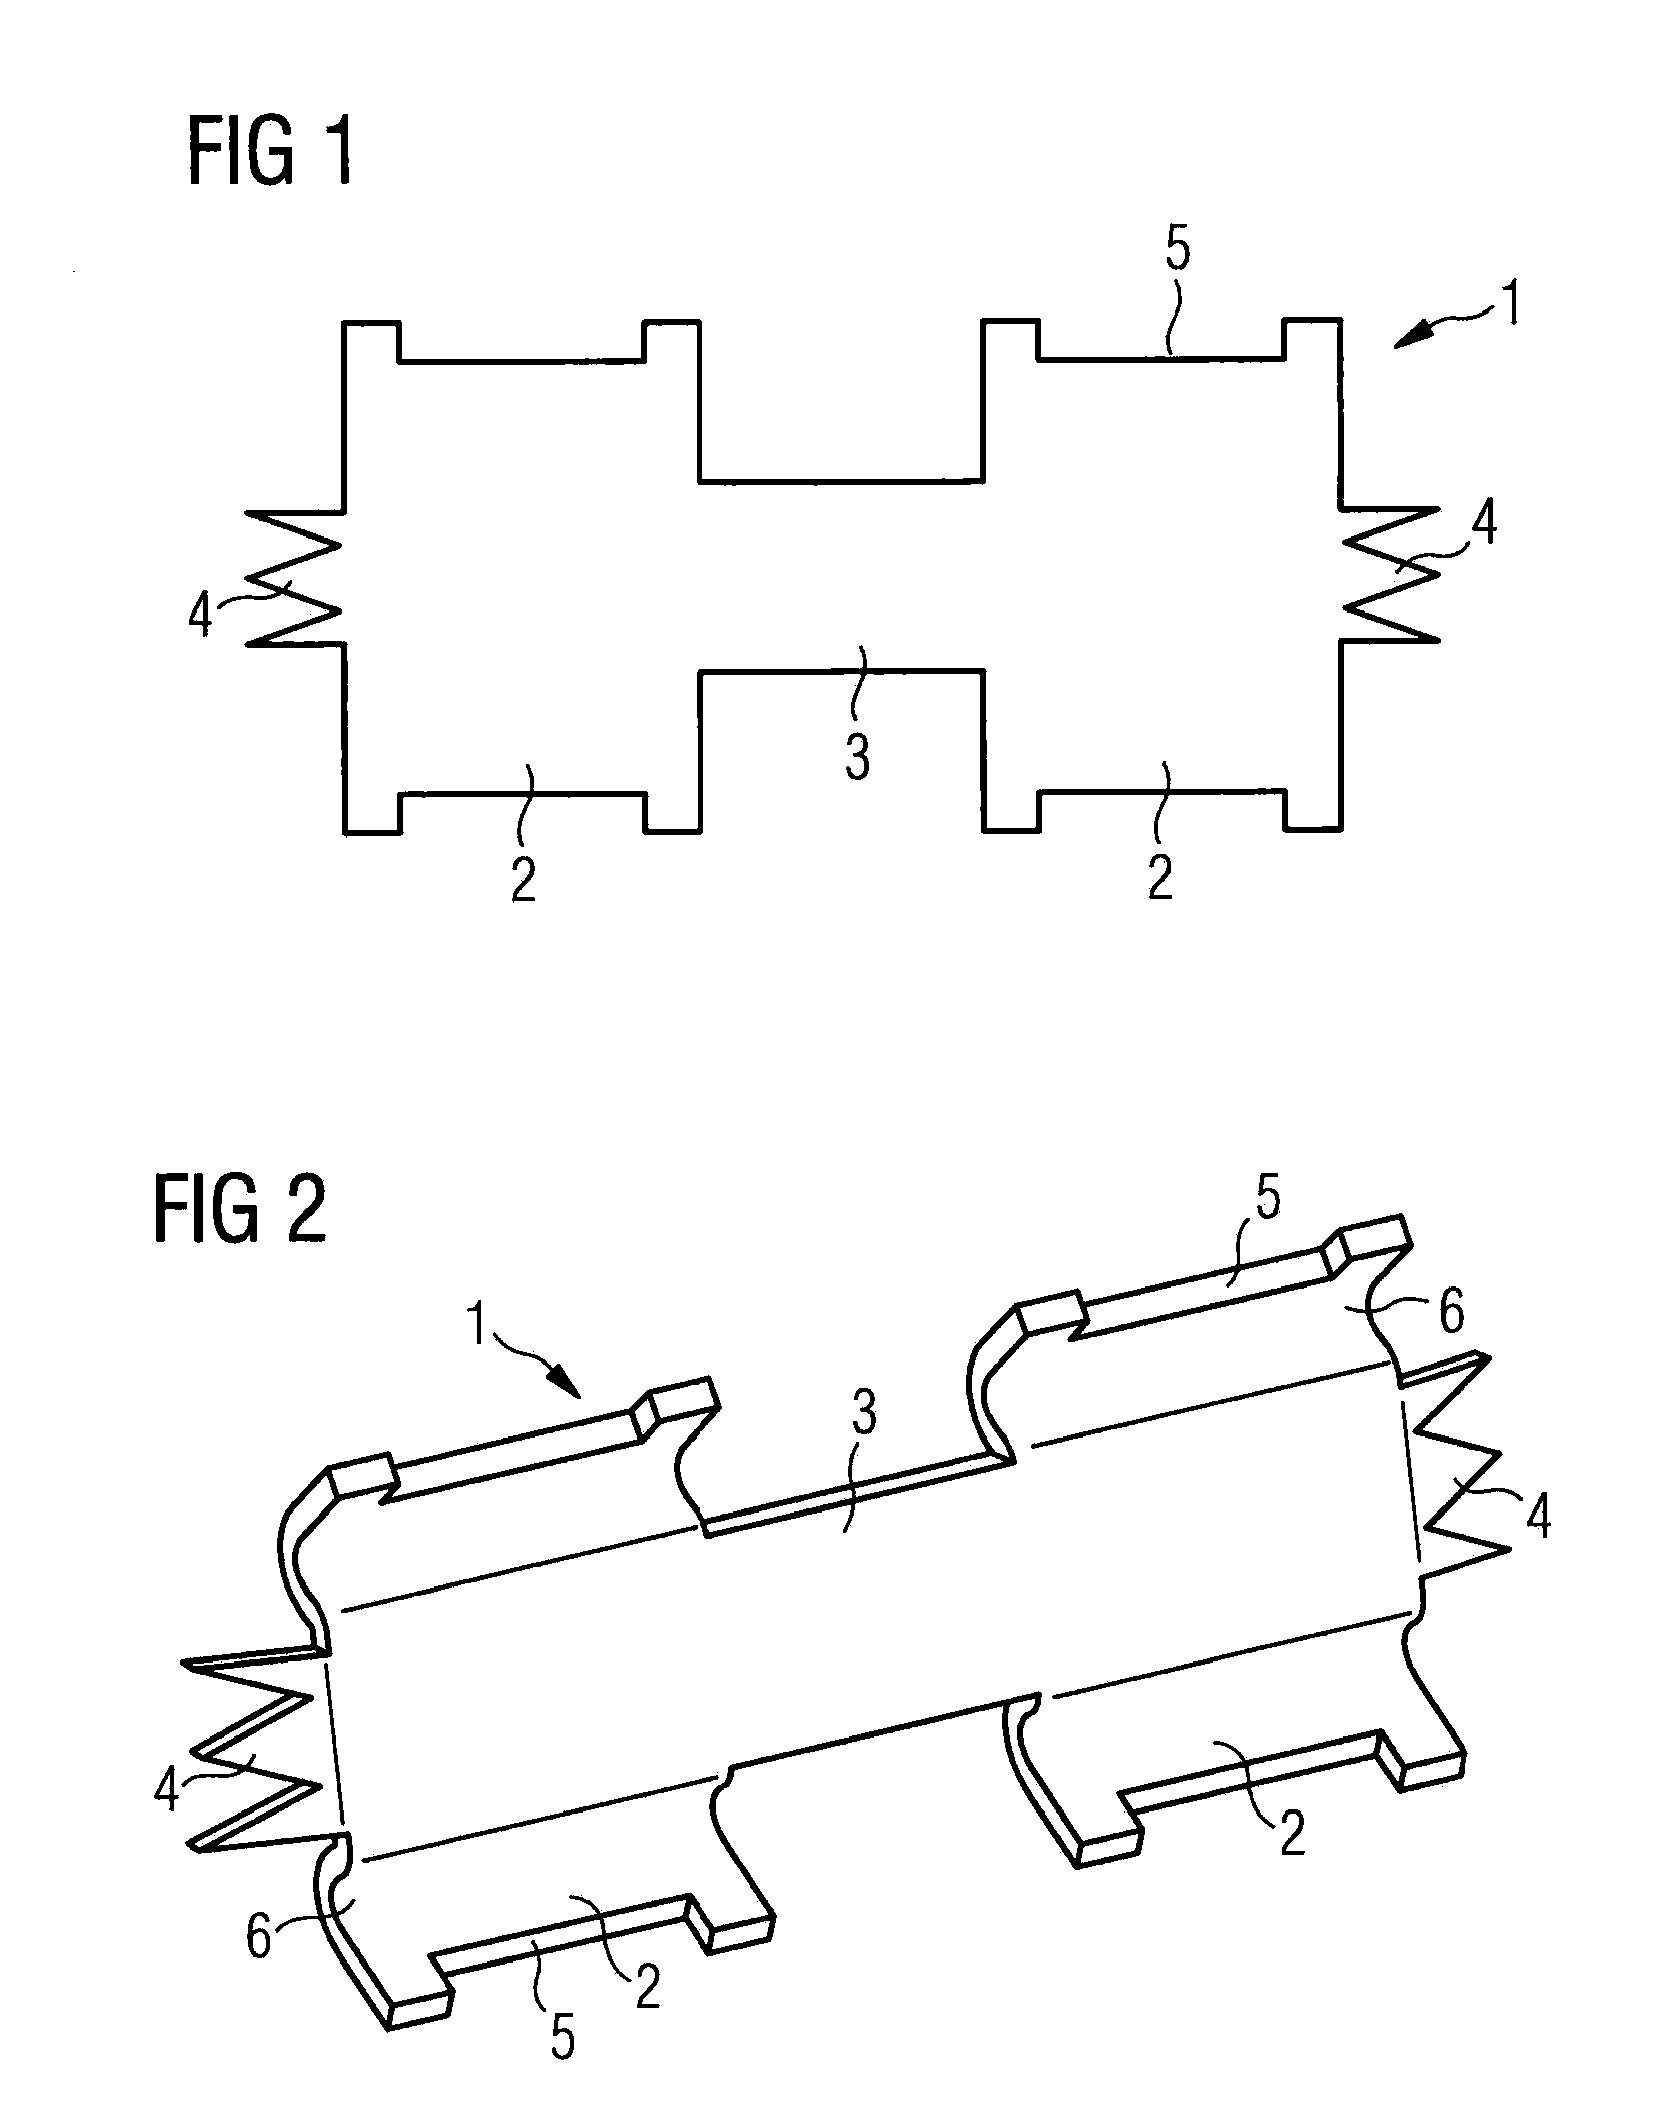 Clamping Element